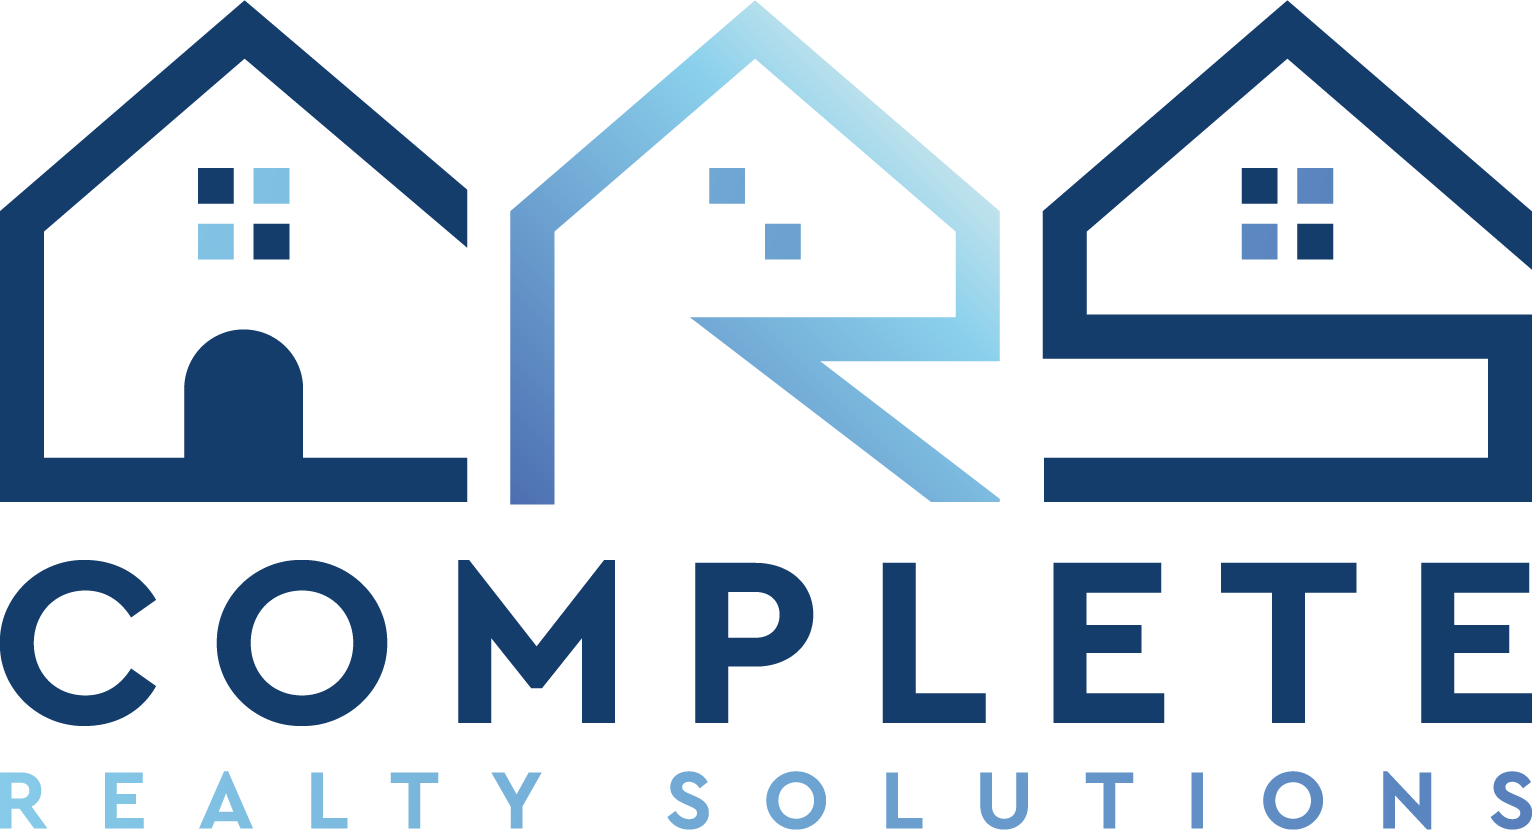 Complete Realty Solutions